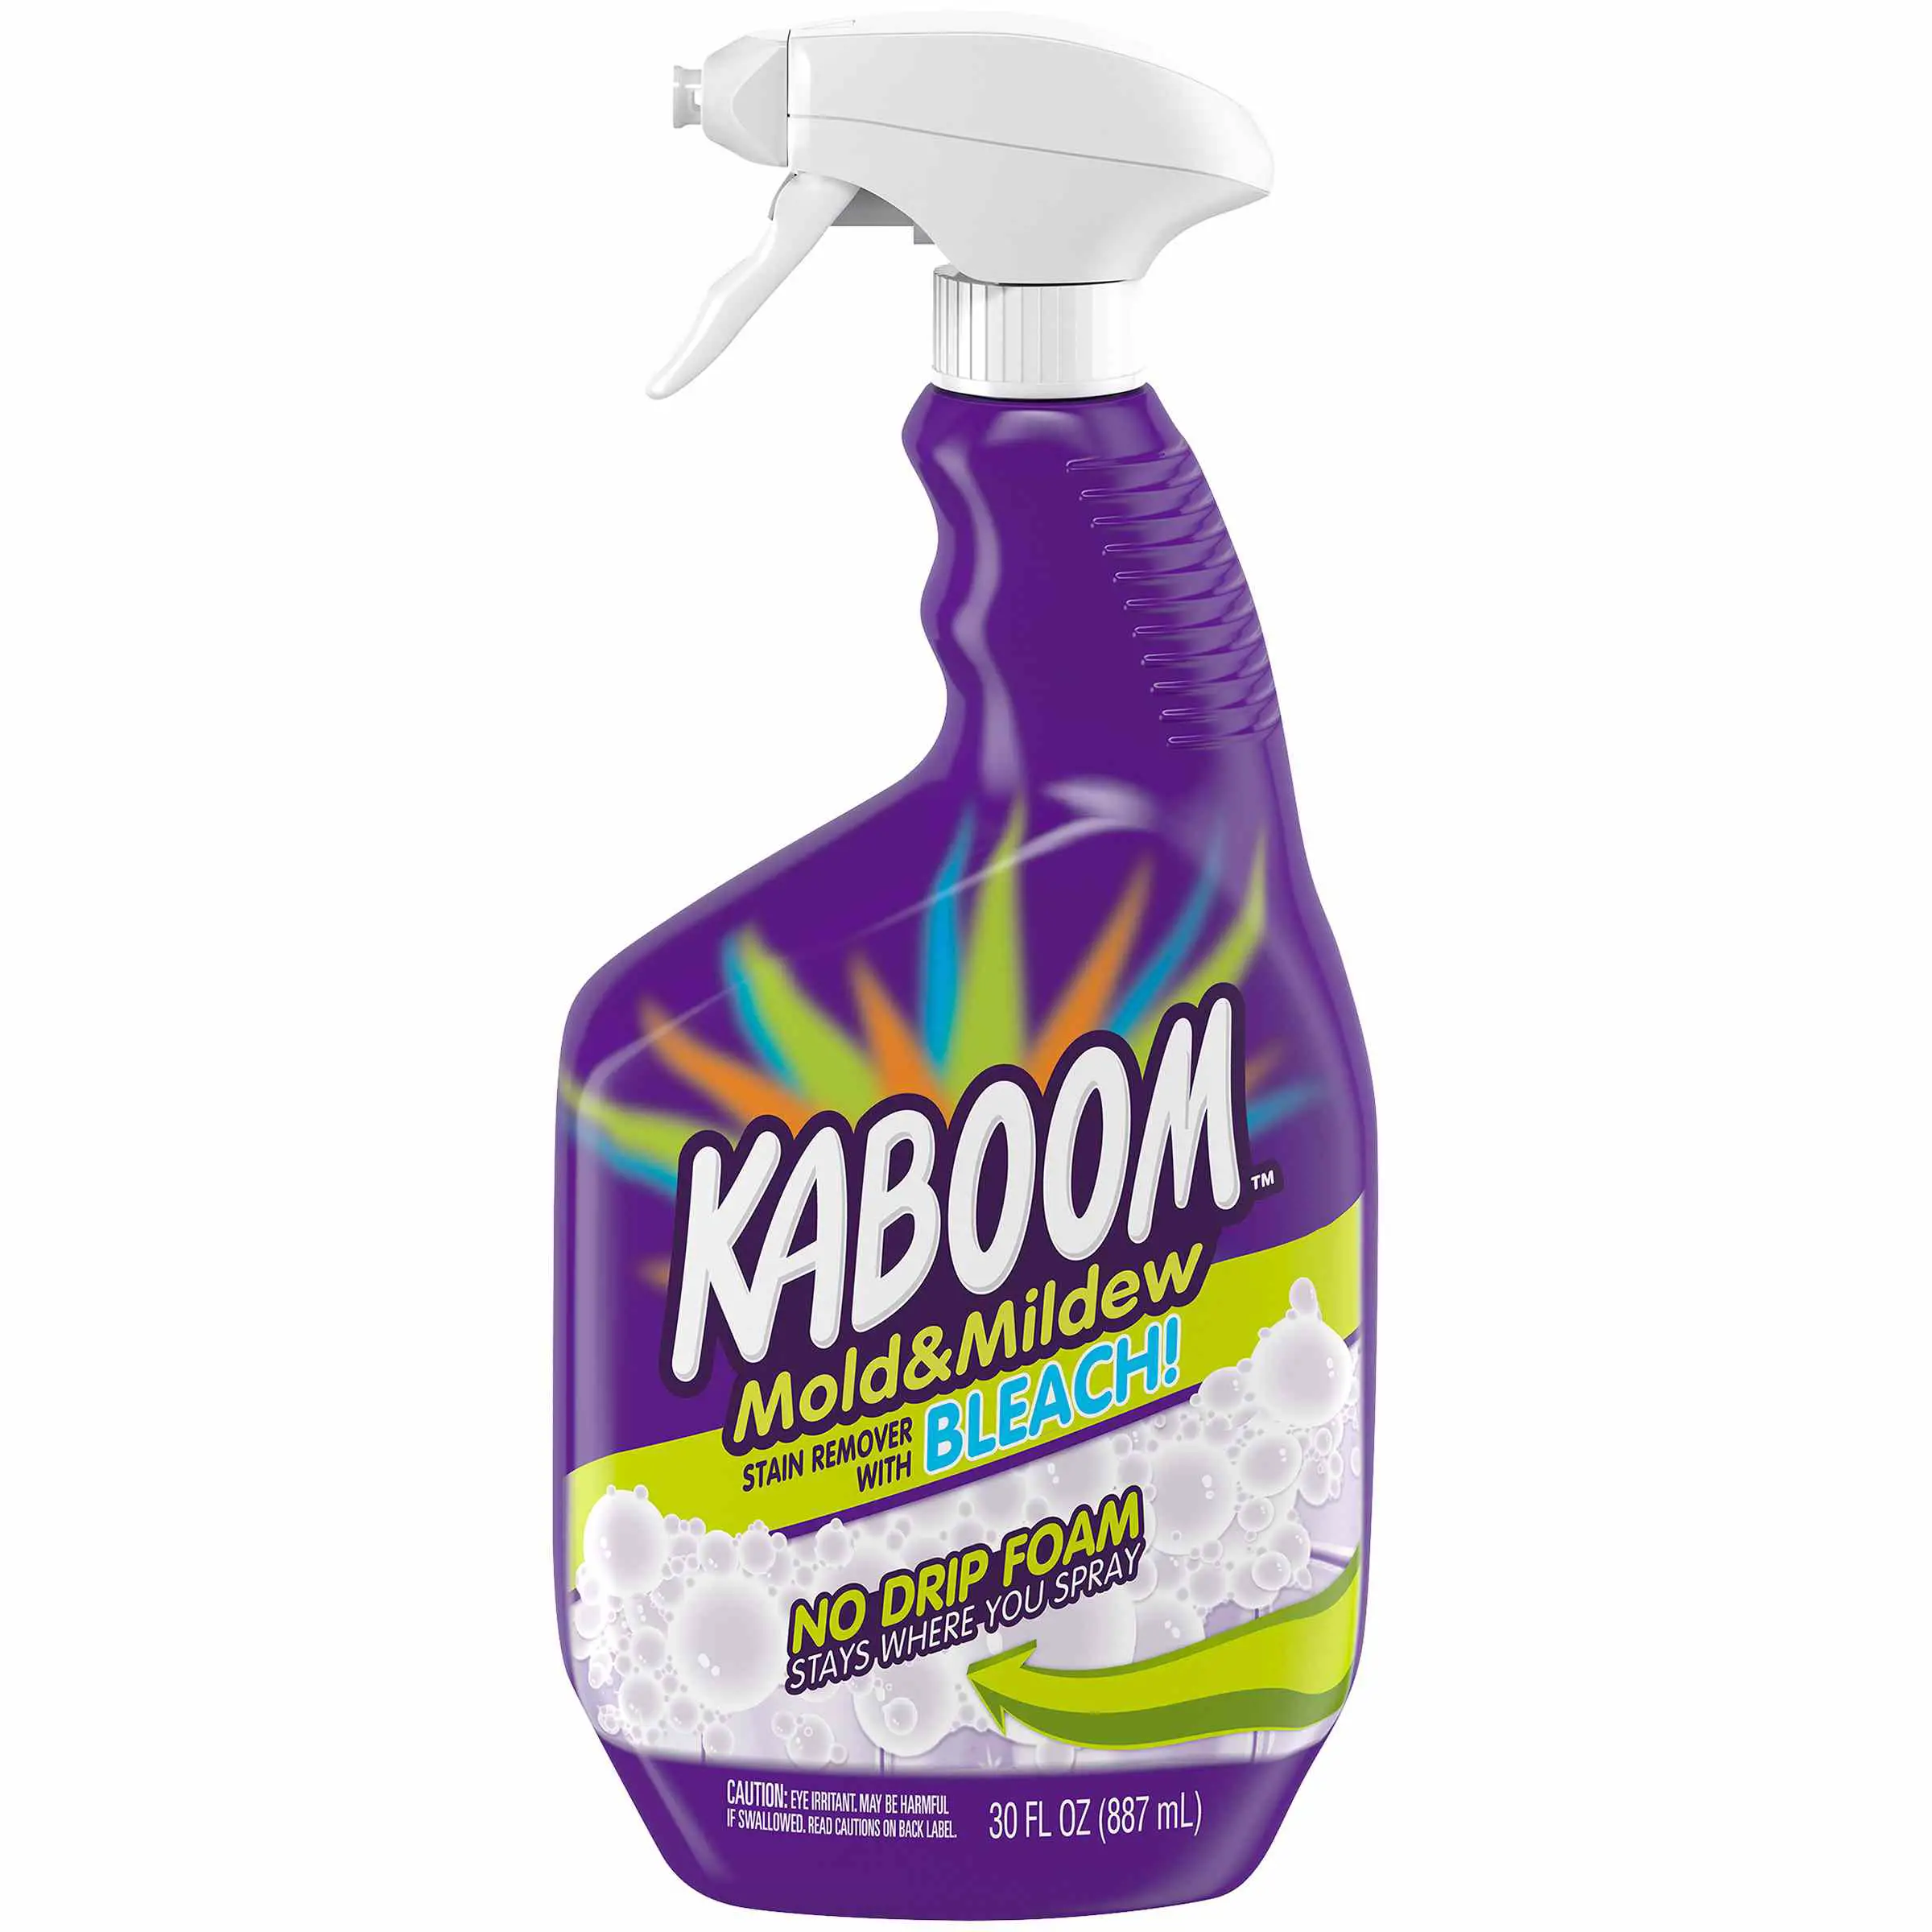 The 8 Best Bathroom Cleaners of 2021